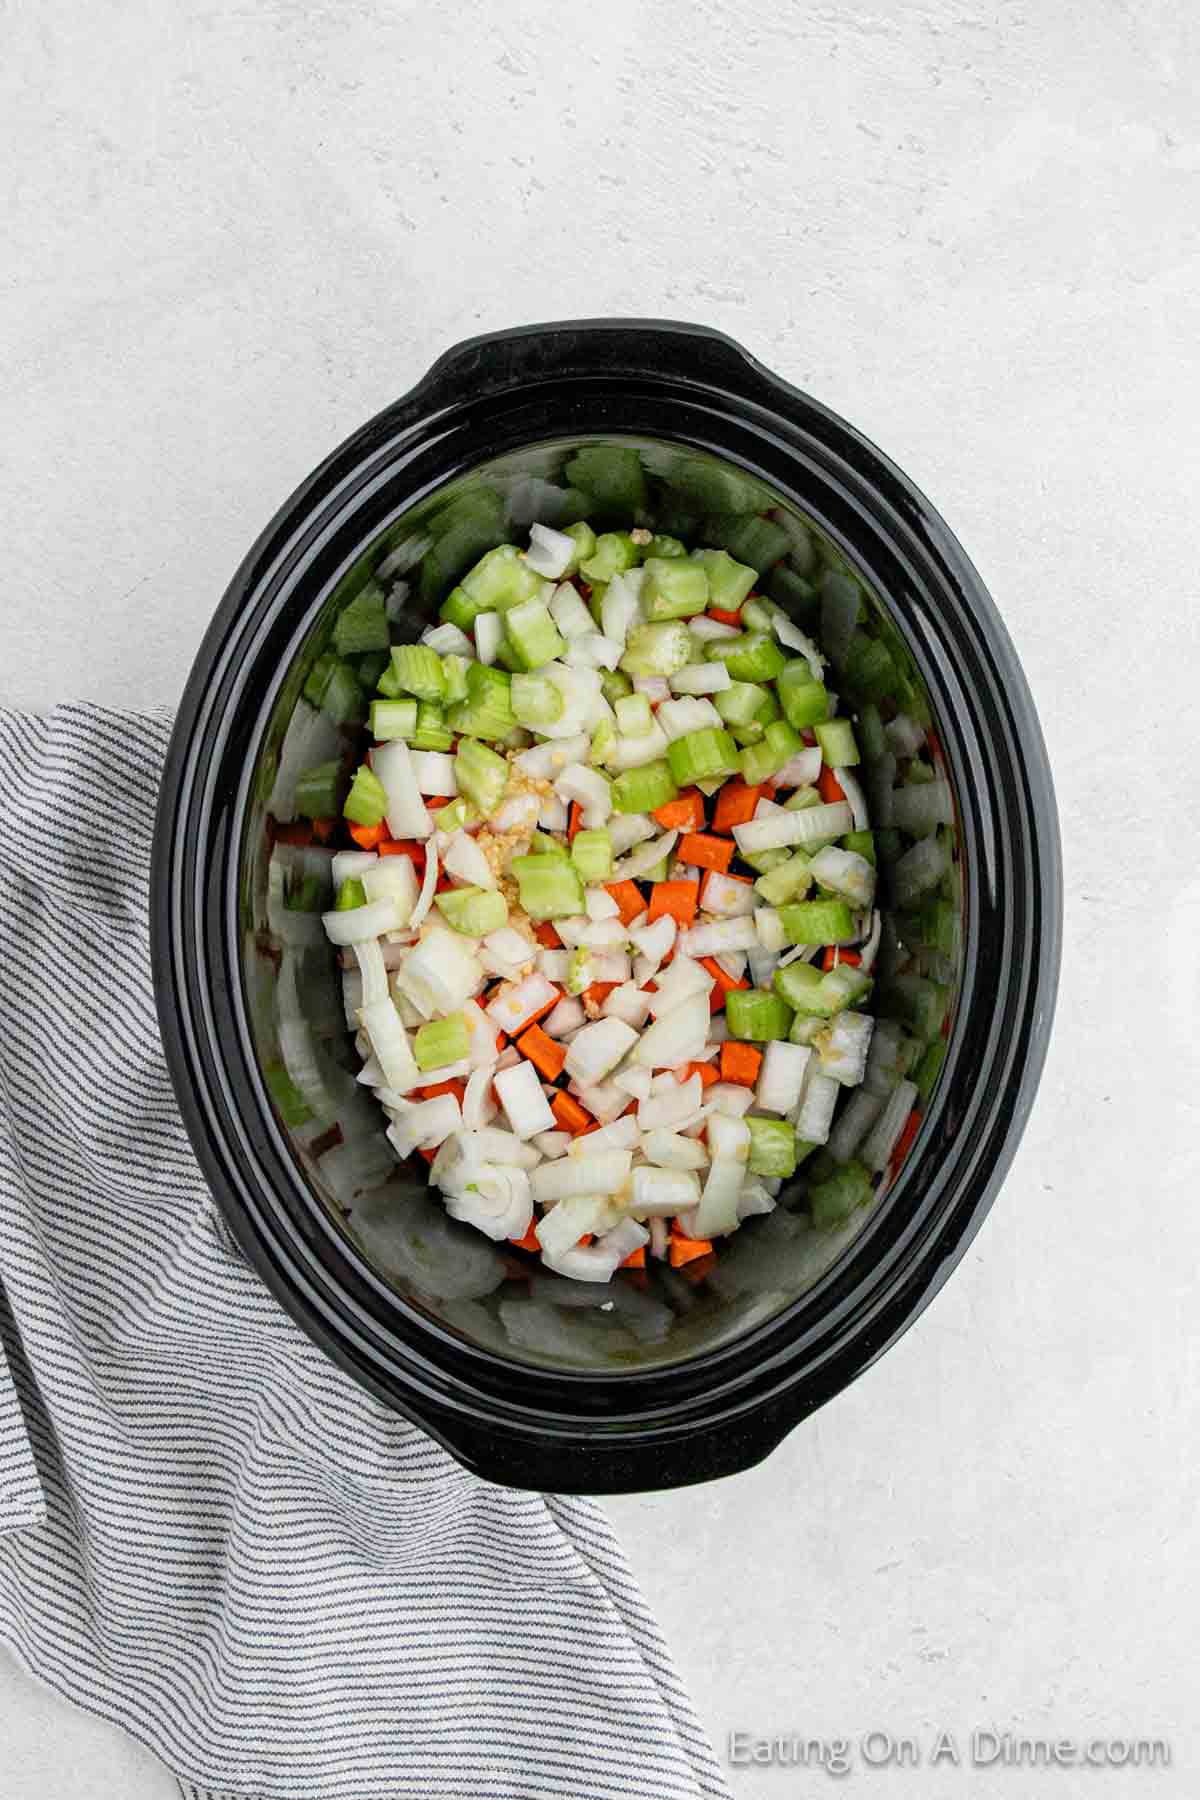 Placing the chopped veggies in the crock pot